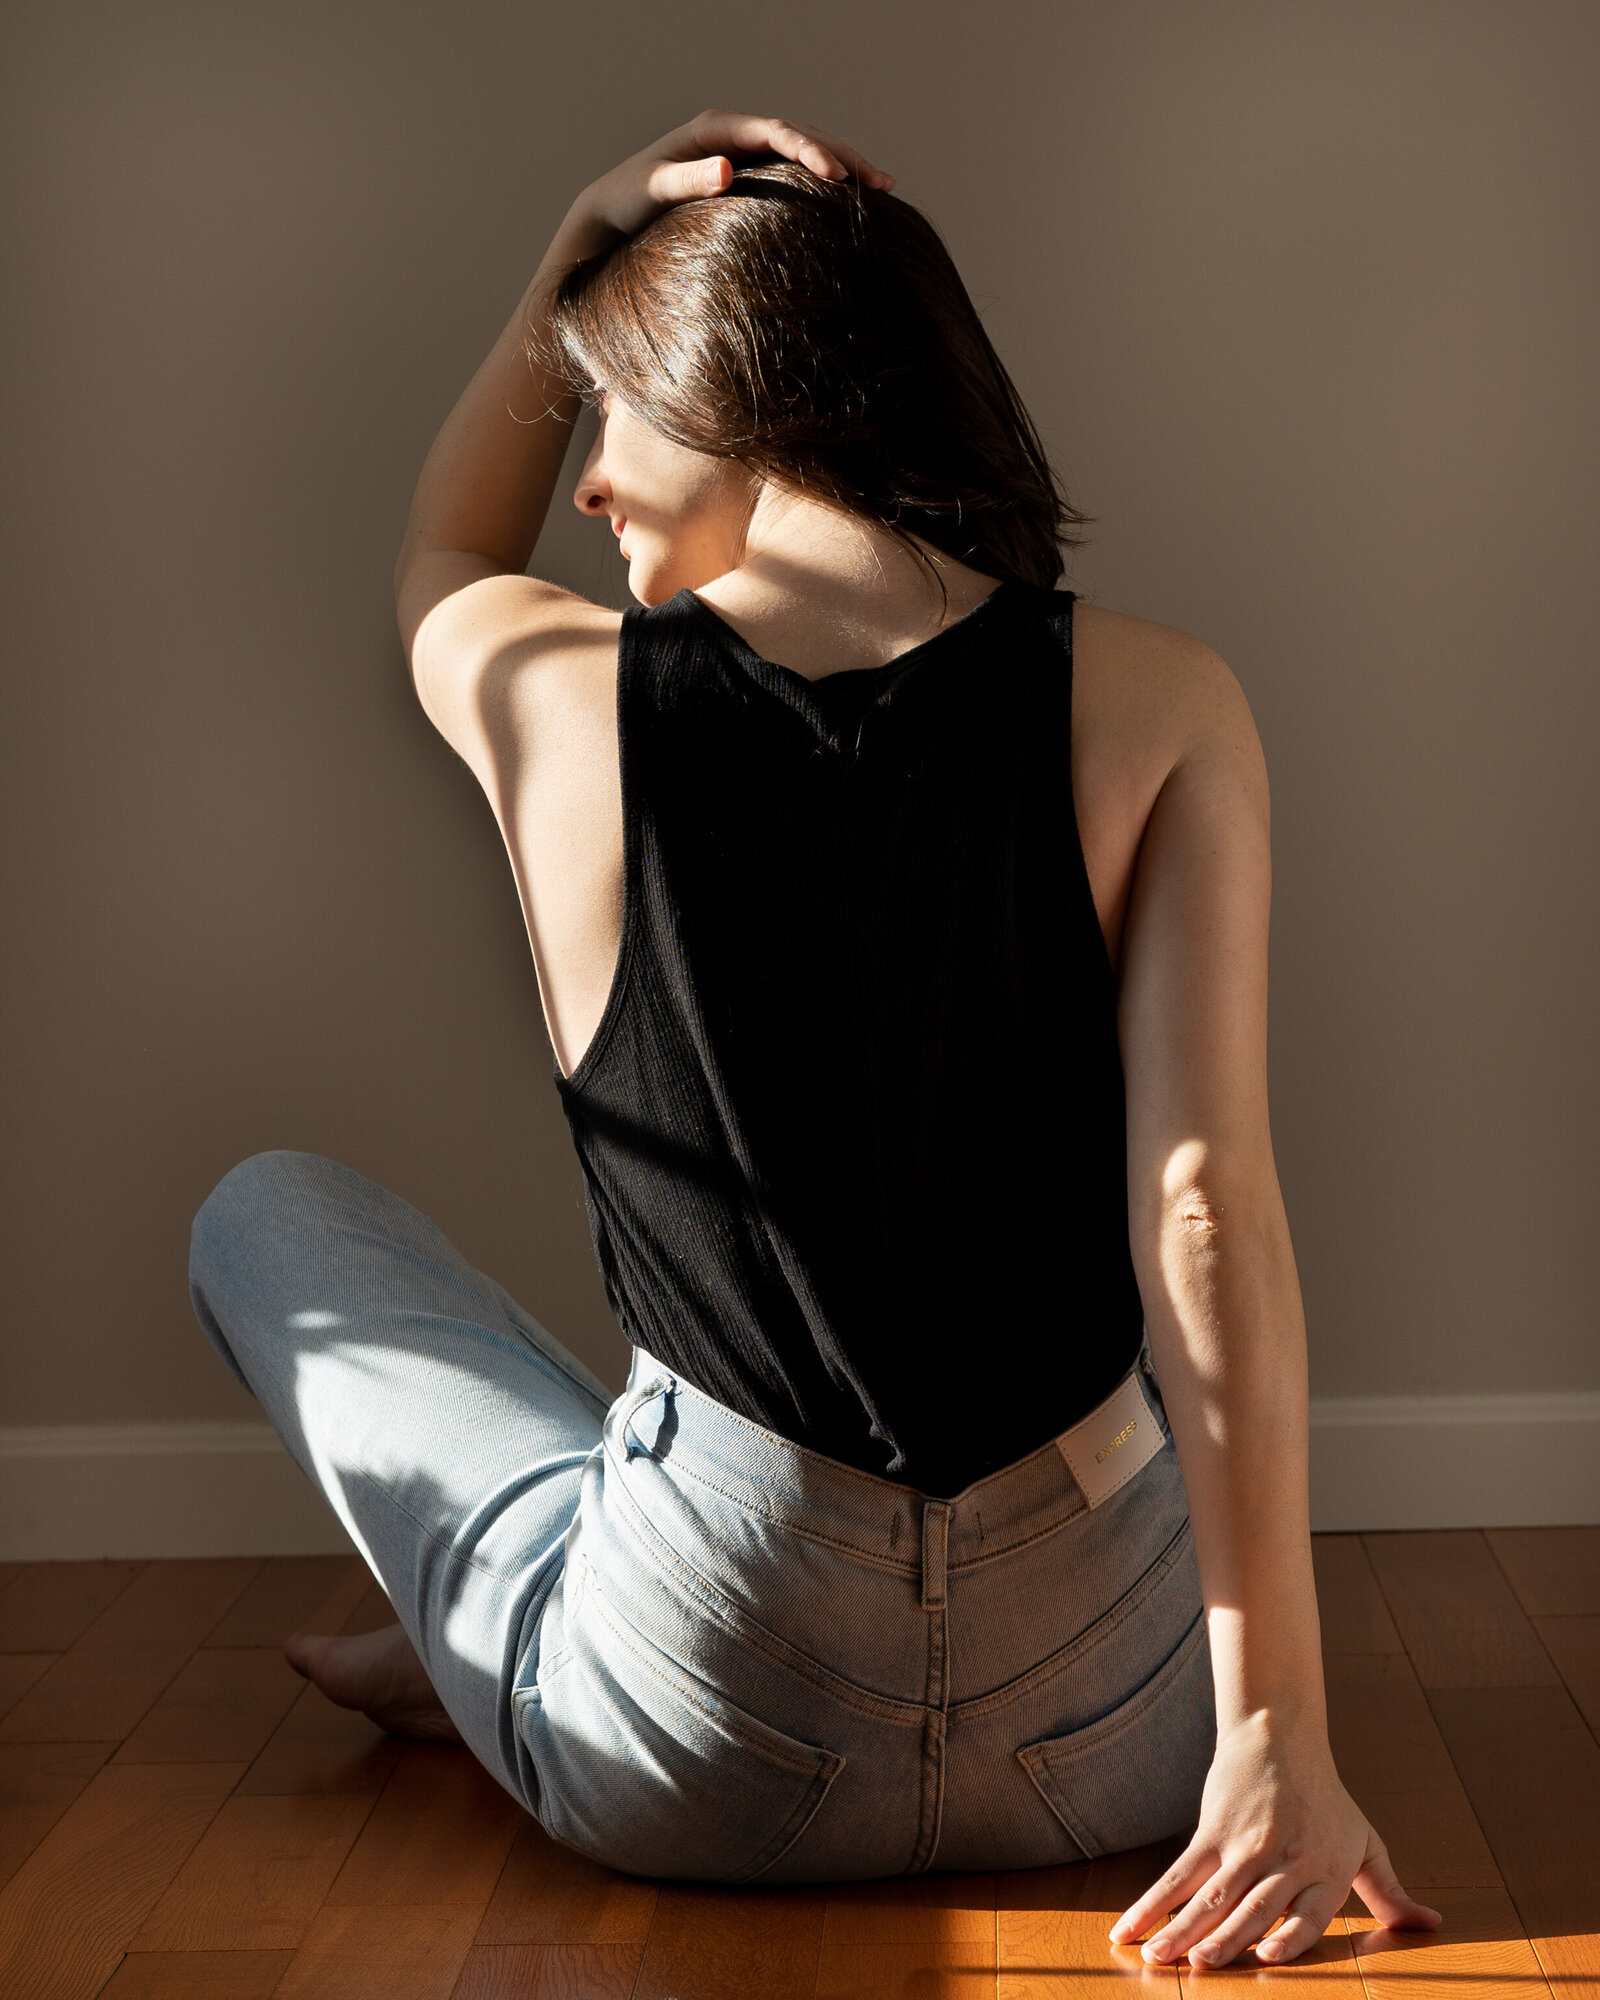 Woman wearing a black shirt and blue jeans during a portrait photography photoshoot.